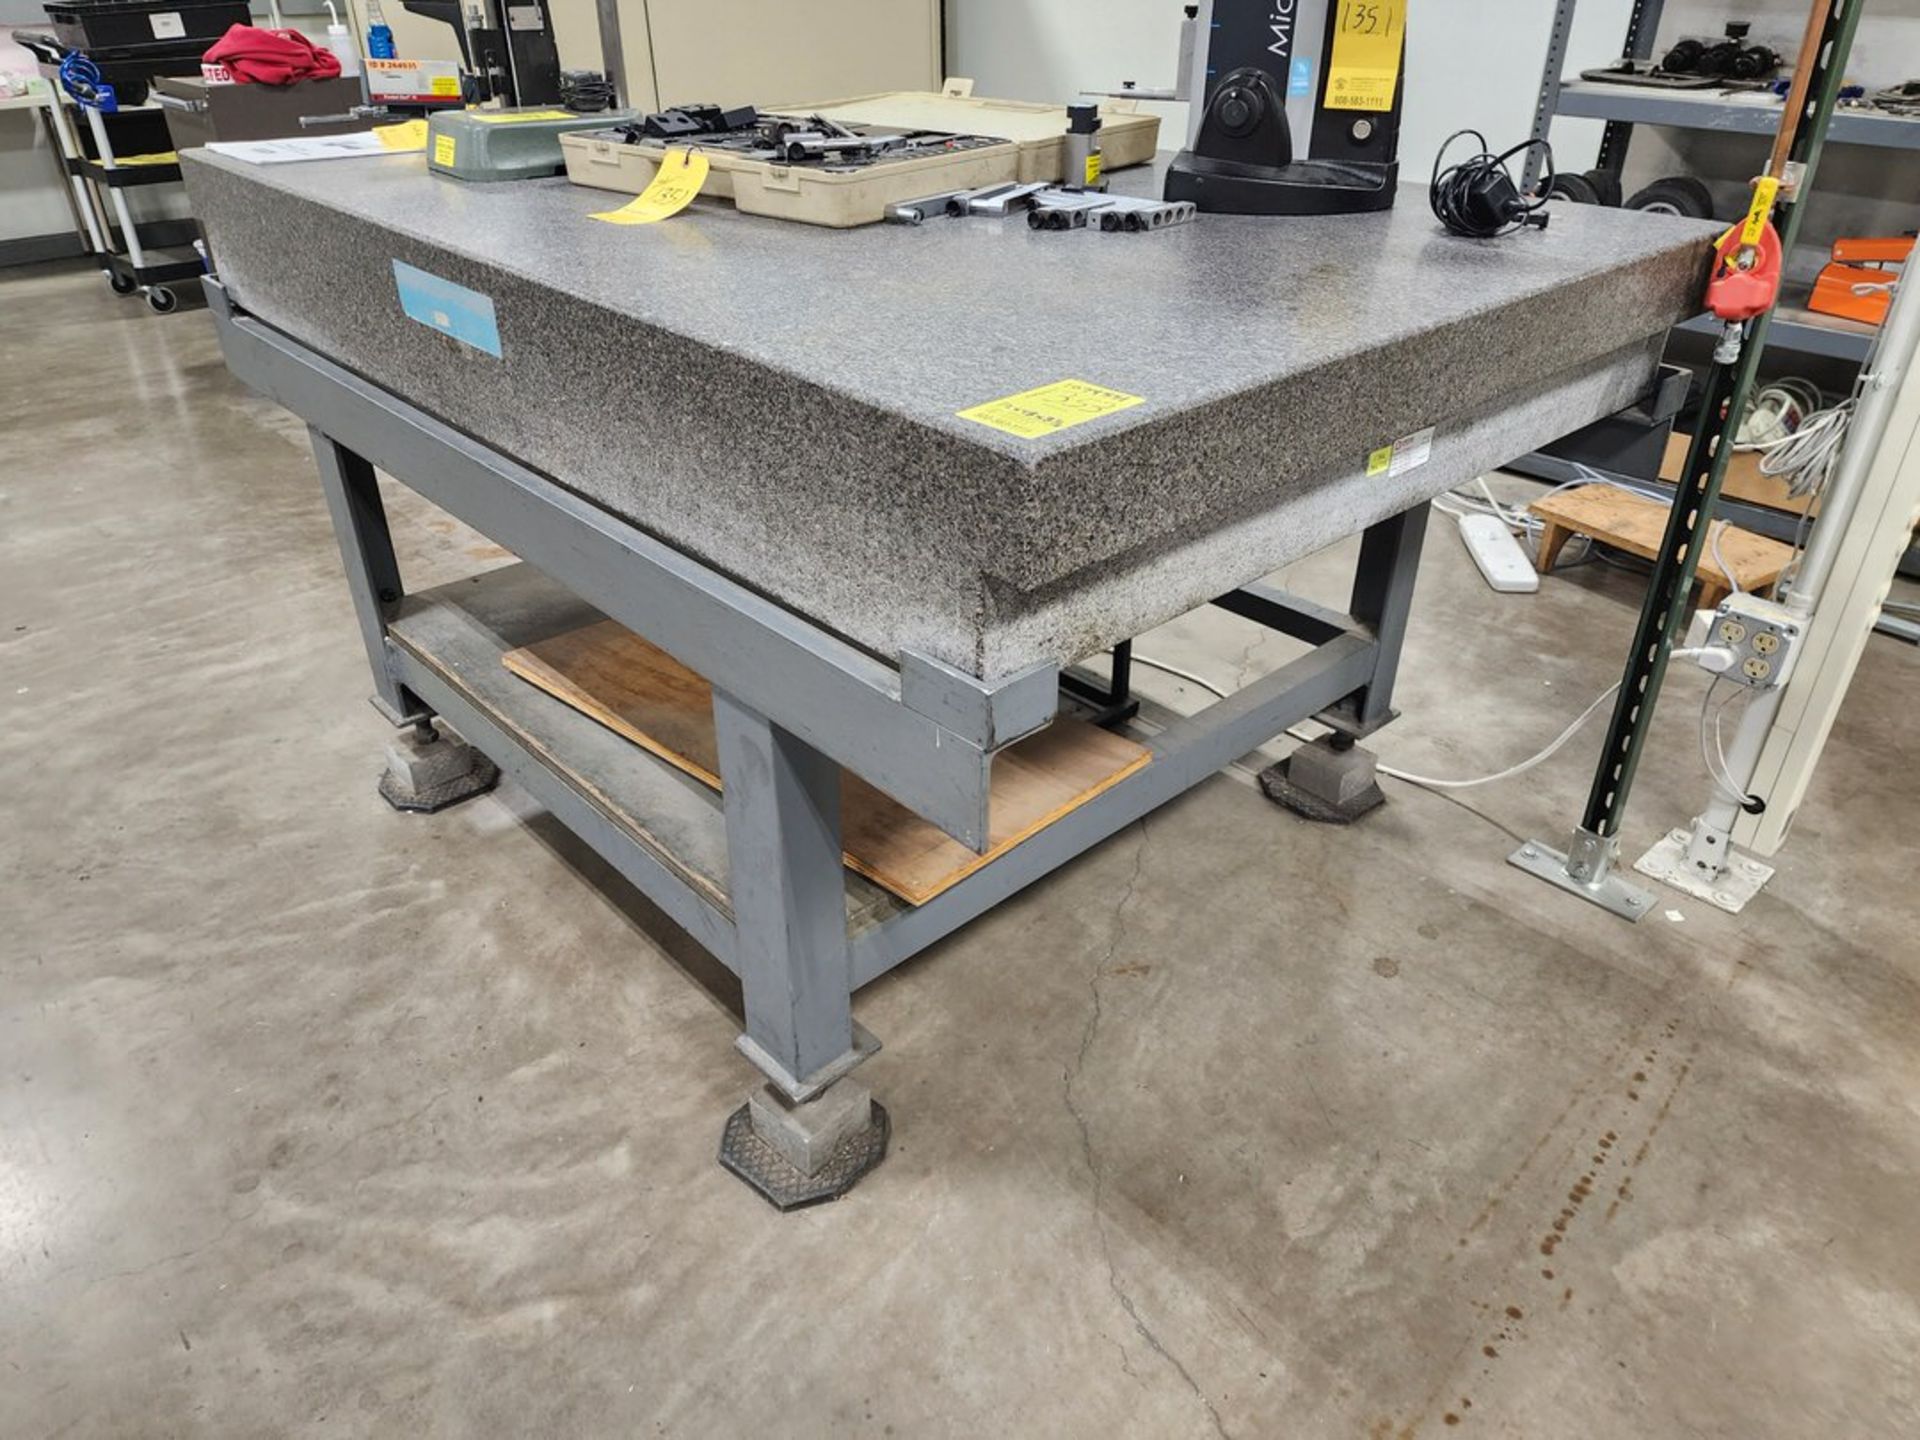 Surface Granite Plate 72" x 48" x 8-1/2" W/ Stand (Asset# 1074551) - Image 2 of 3